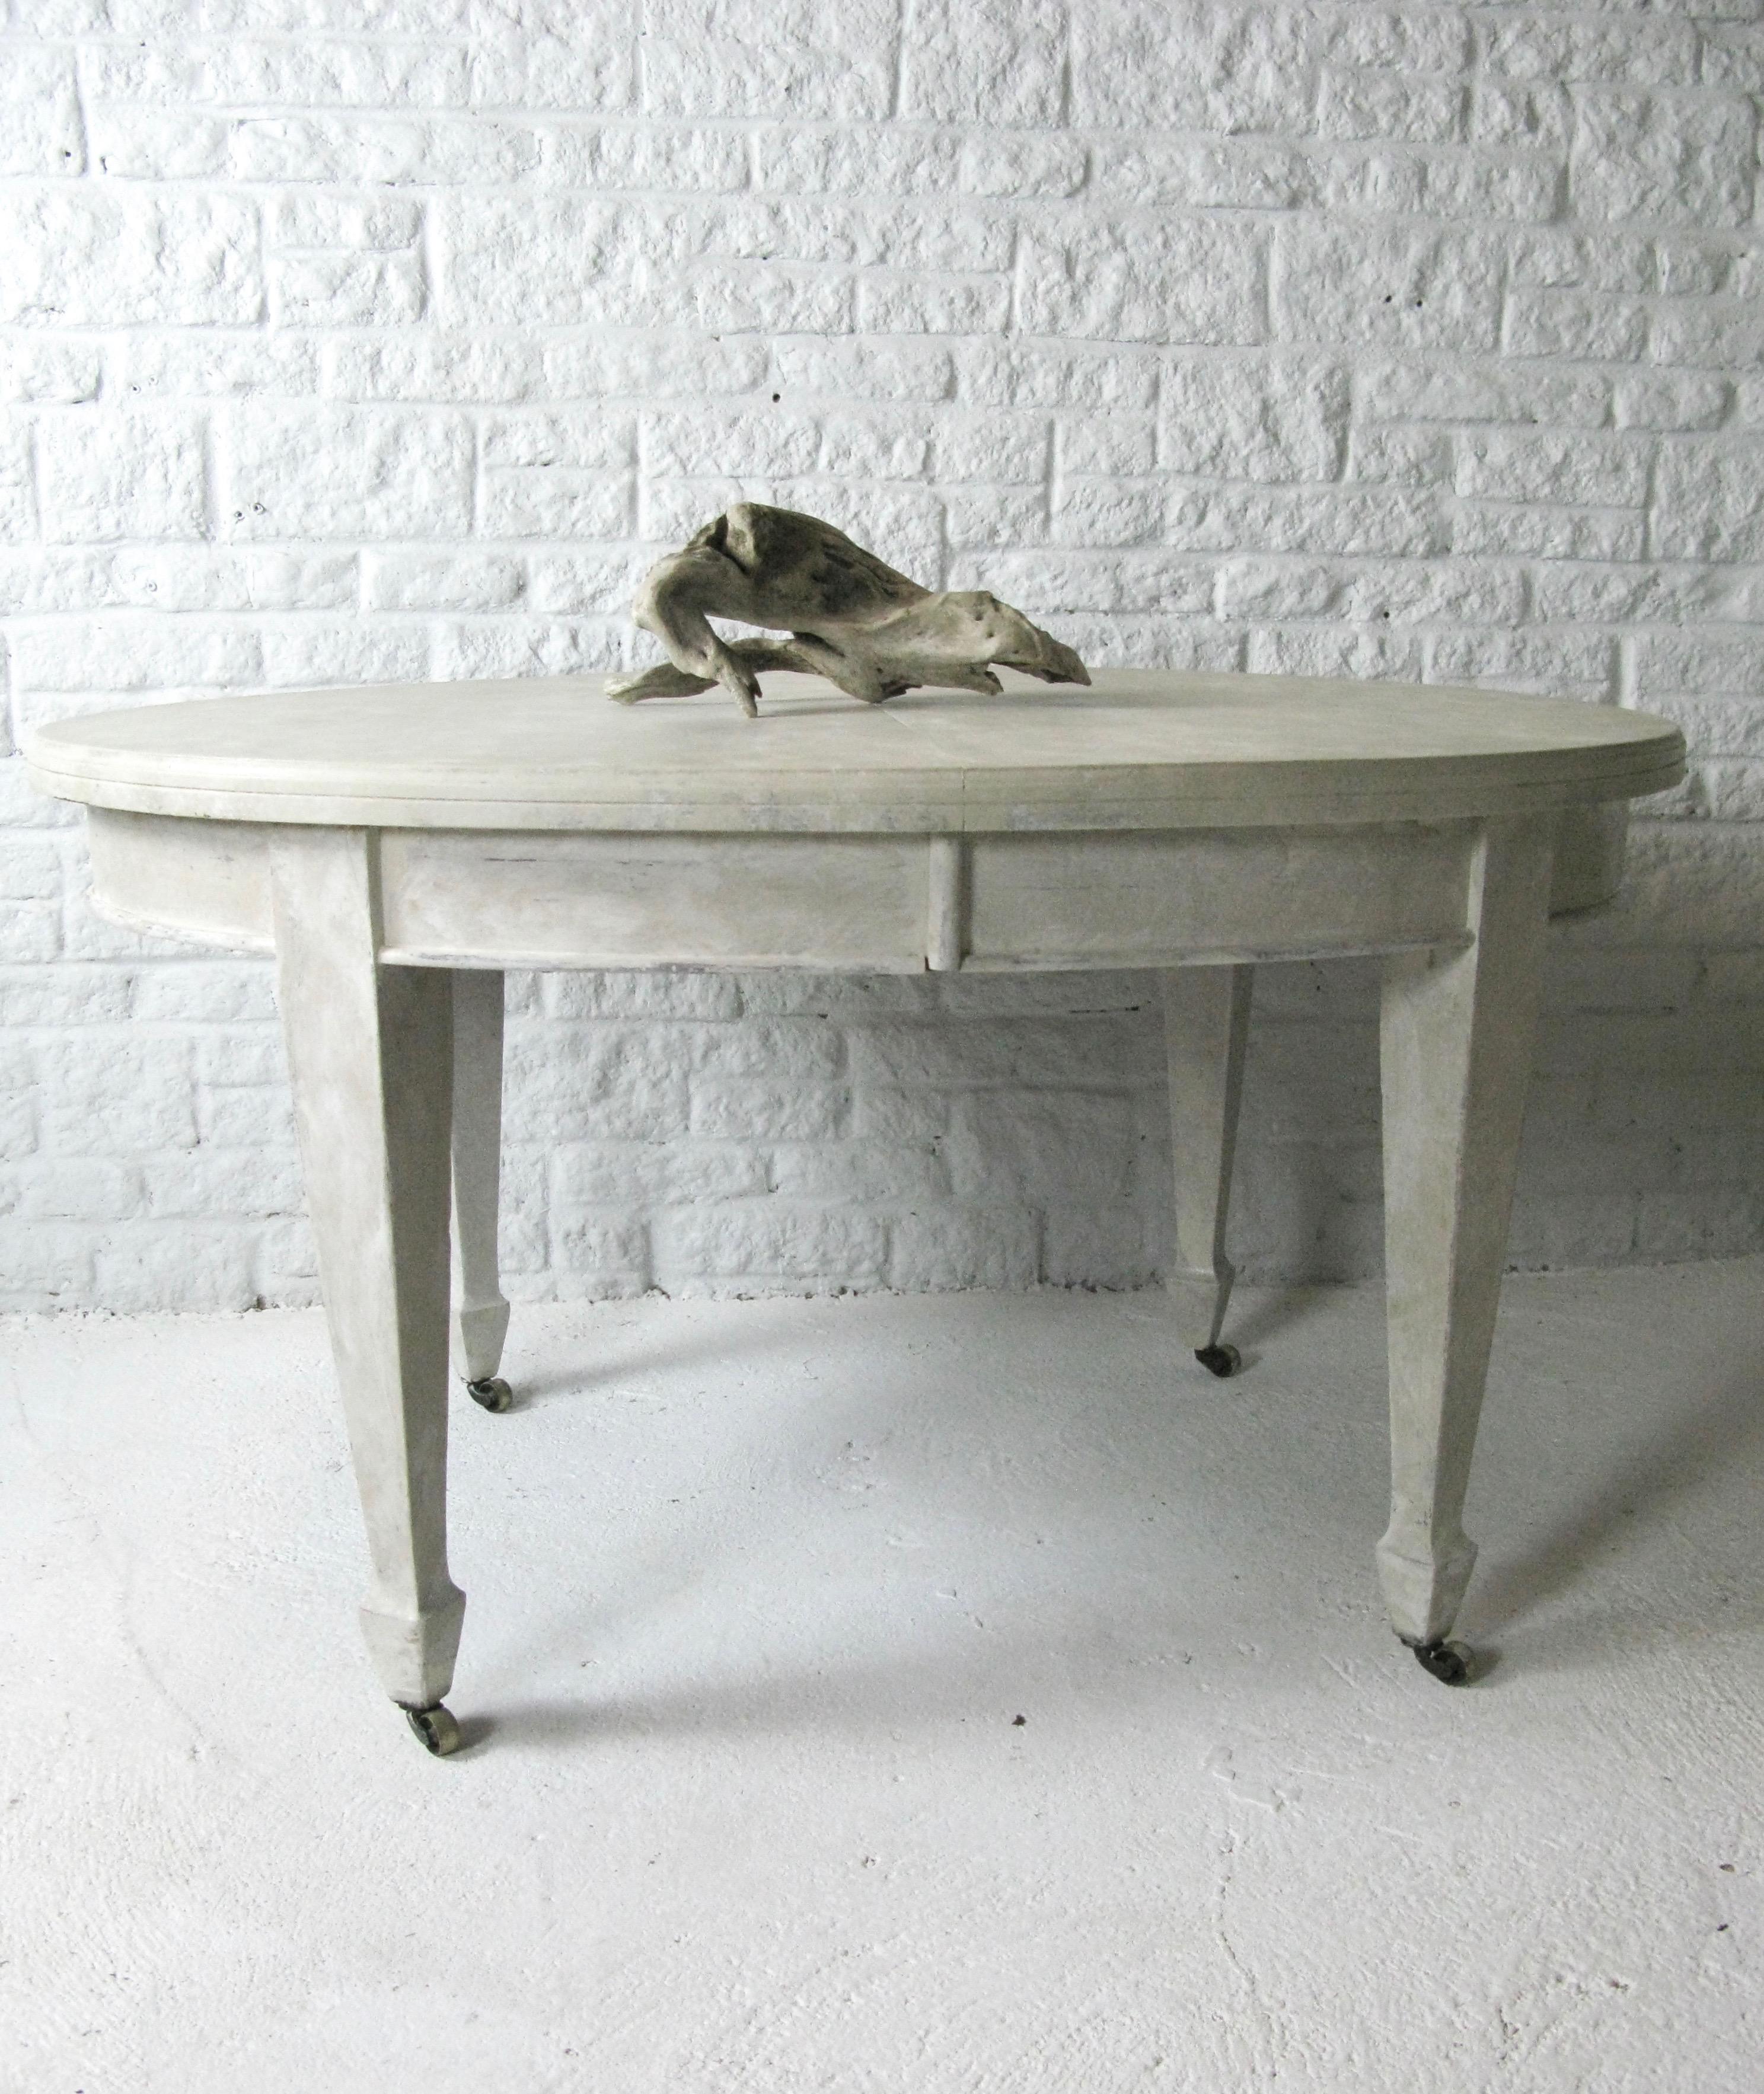 Gustavian style painted cream with a crème (ish) tint and a white border touches.

The table has robust tapered fluted legs and is extendable. Leave is not available. 

Supported on brass castors.
Excellent as a kitchen table.

Word from the